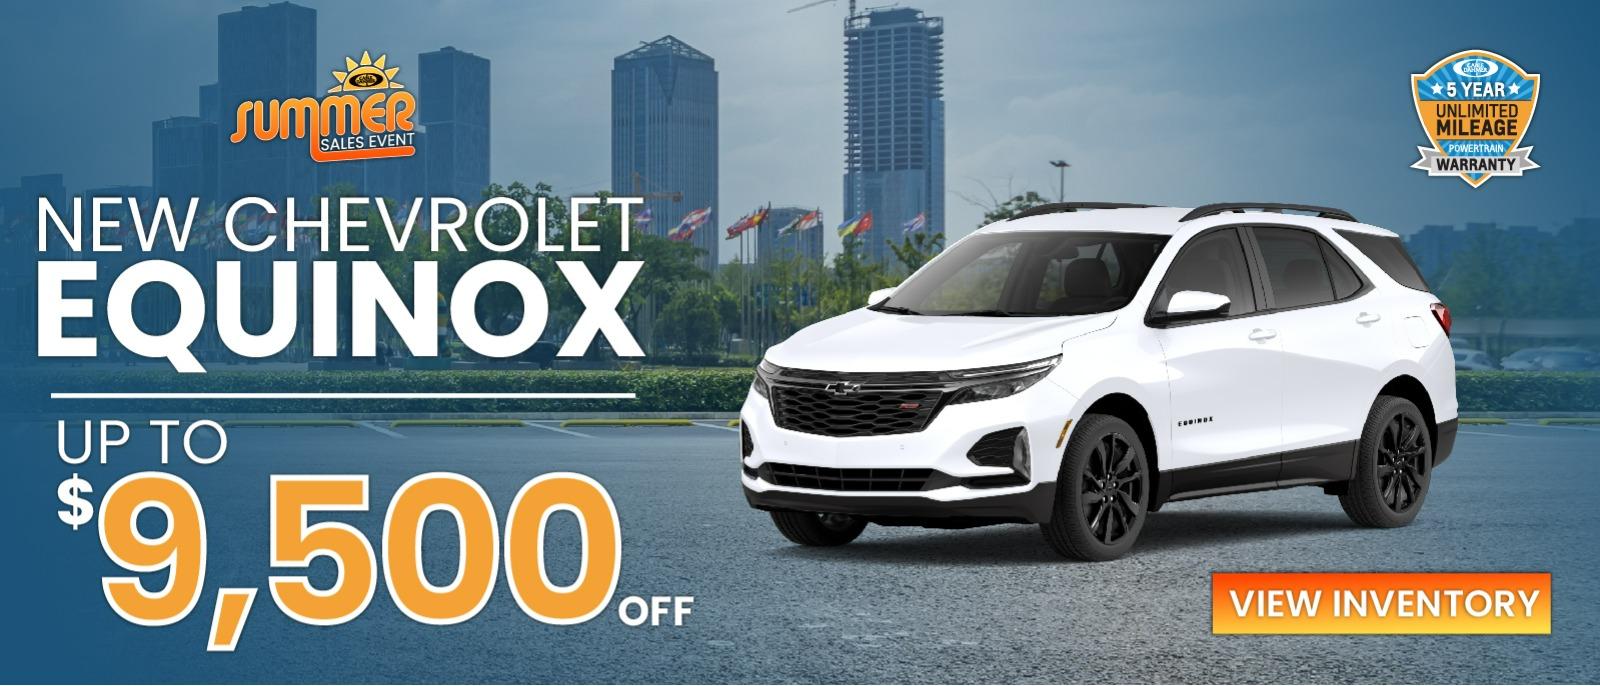 New Chevrolet Equinox
Offer: Up to $9,500 off